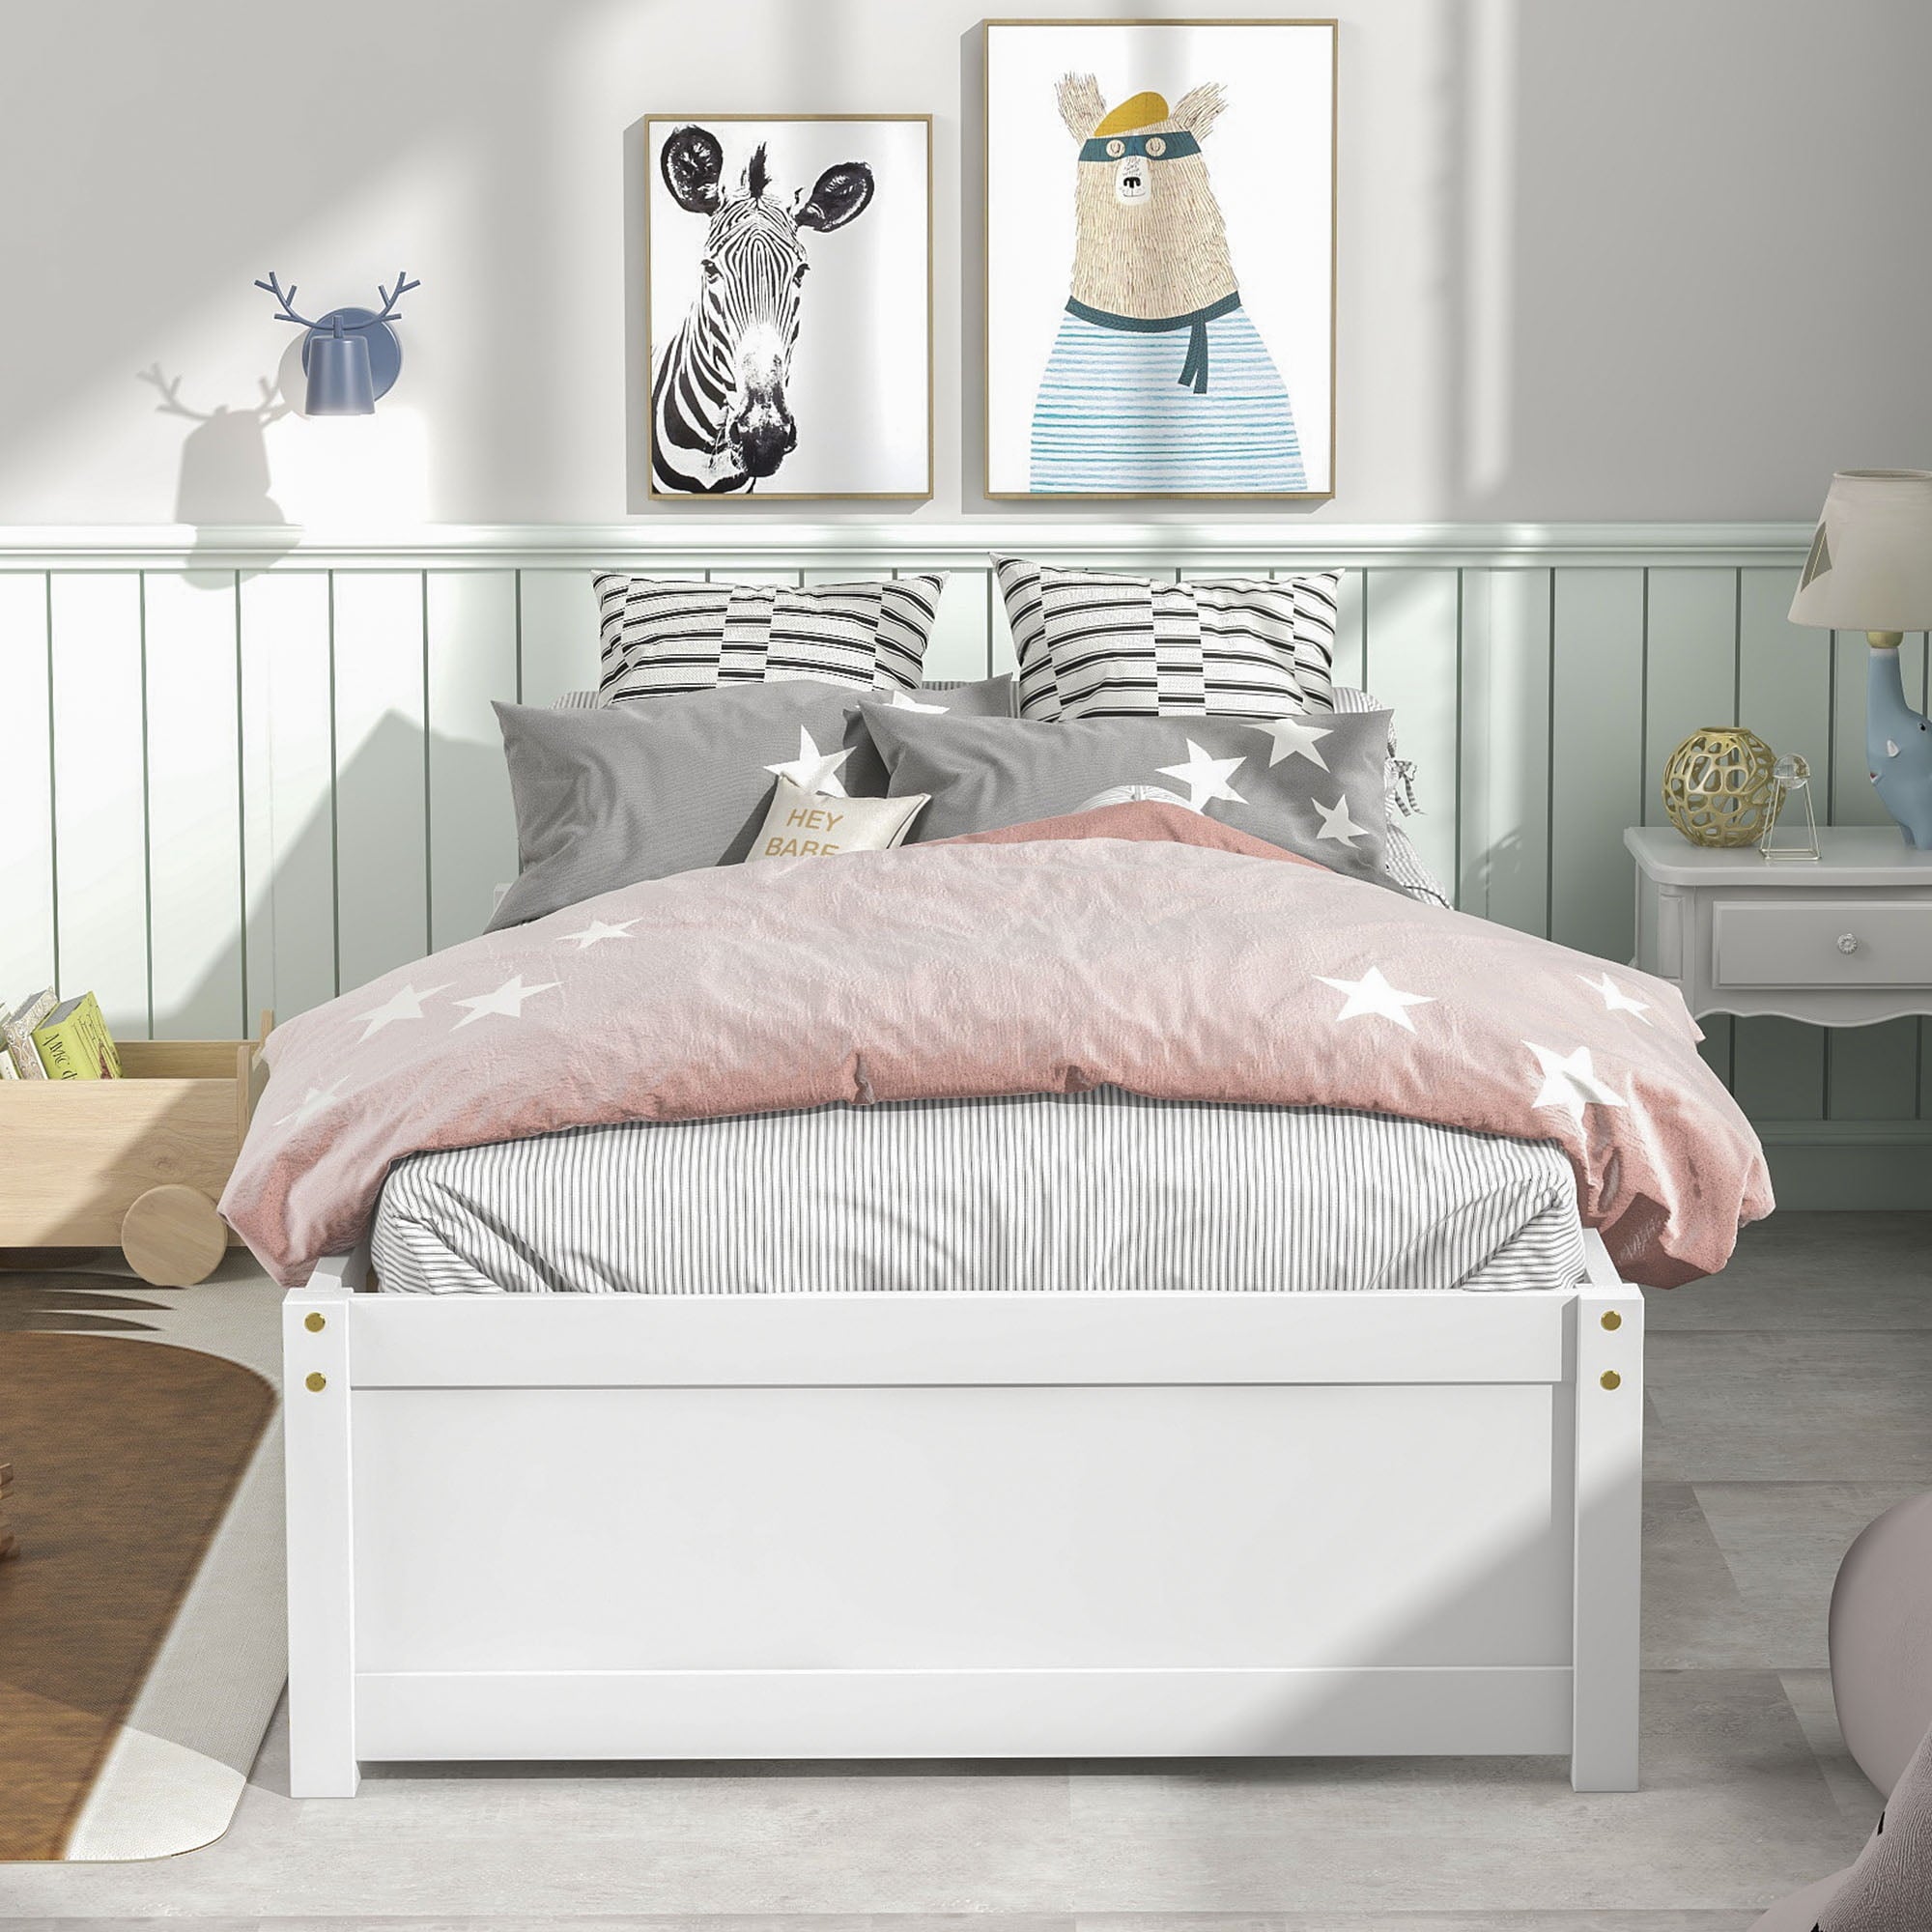 Twin Platform Bed Frame with Storage Drawers, Kids Twin Size Bed Frame No Box Spring Needed, Solid Wood Platform Beds with Two Drawers, Modern Single Bed Bedroom Furniture, White, J1159